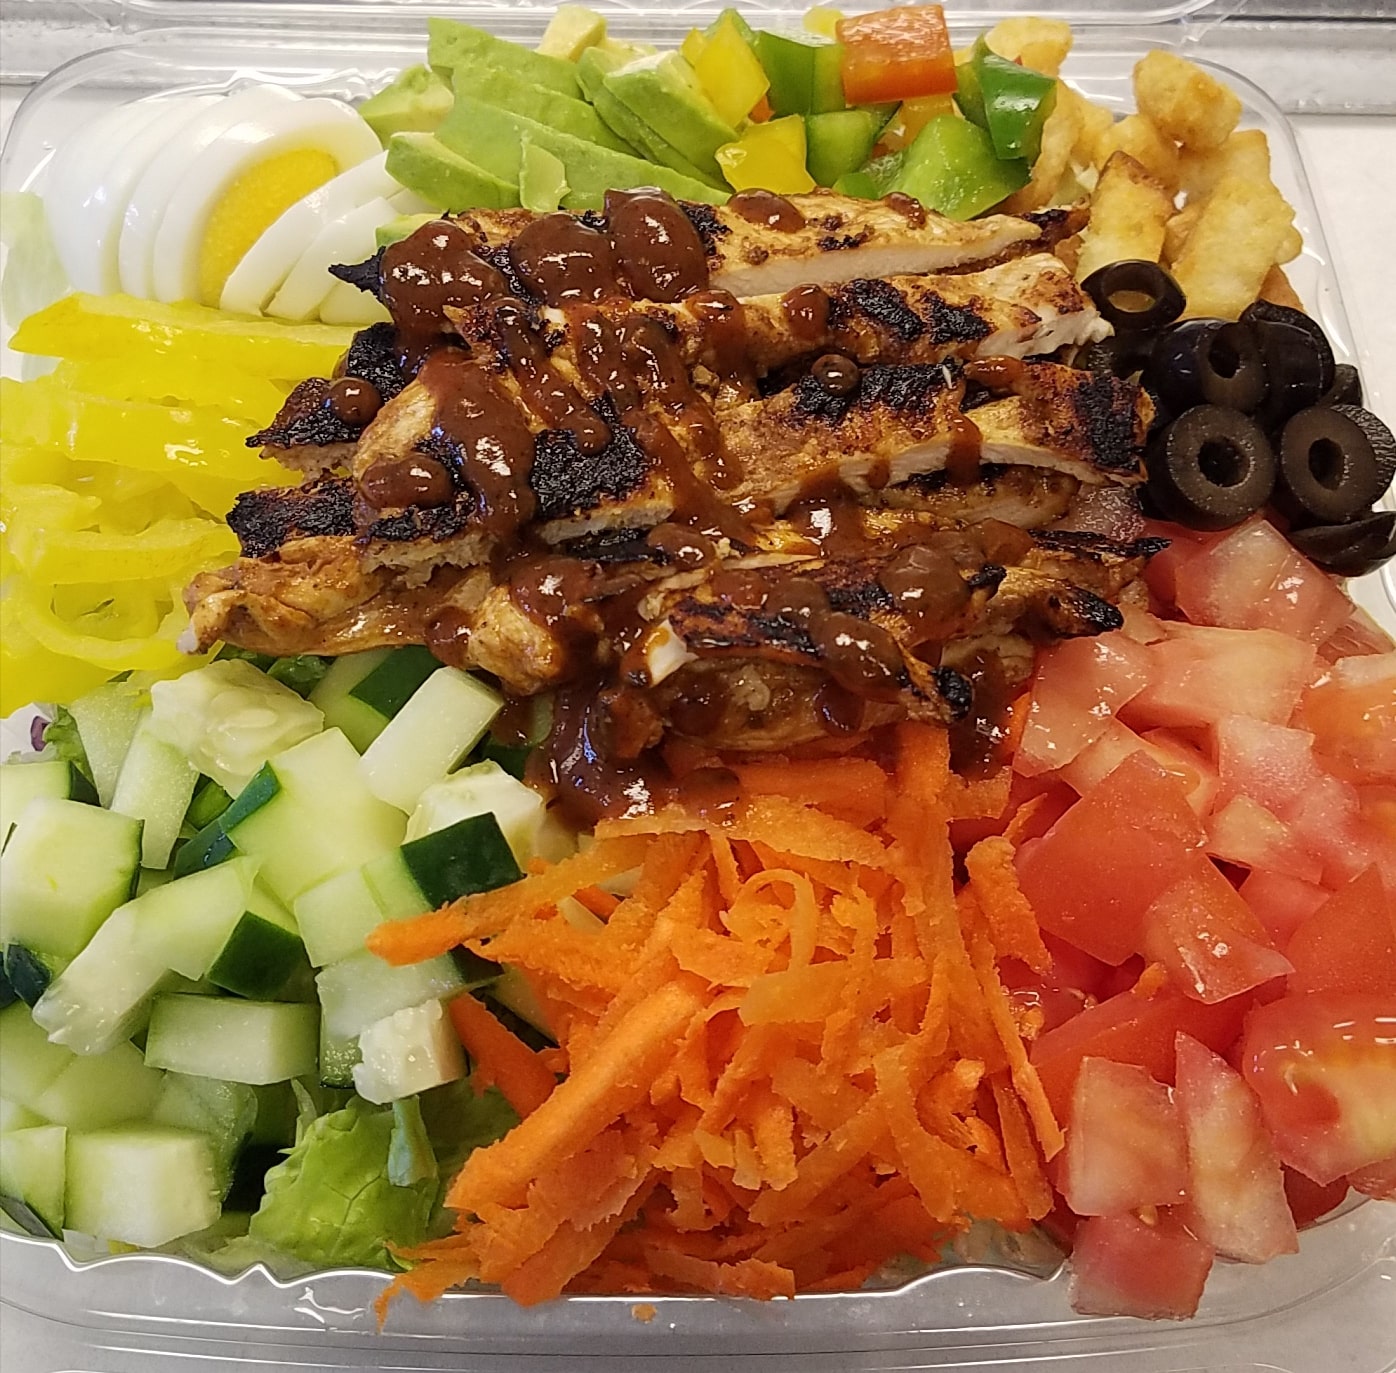 Grilled Chicken and Salad